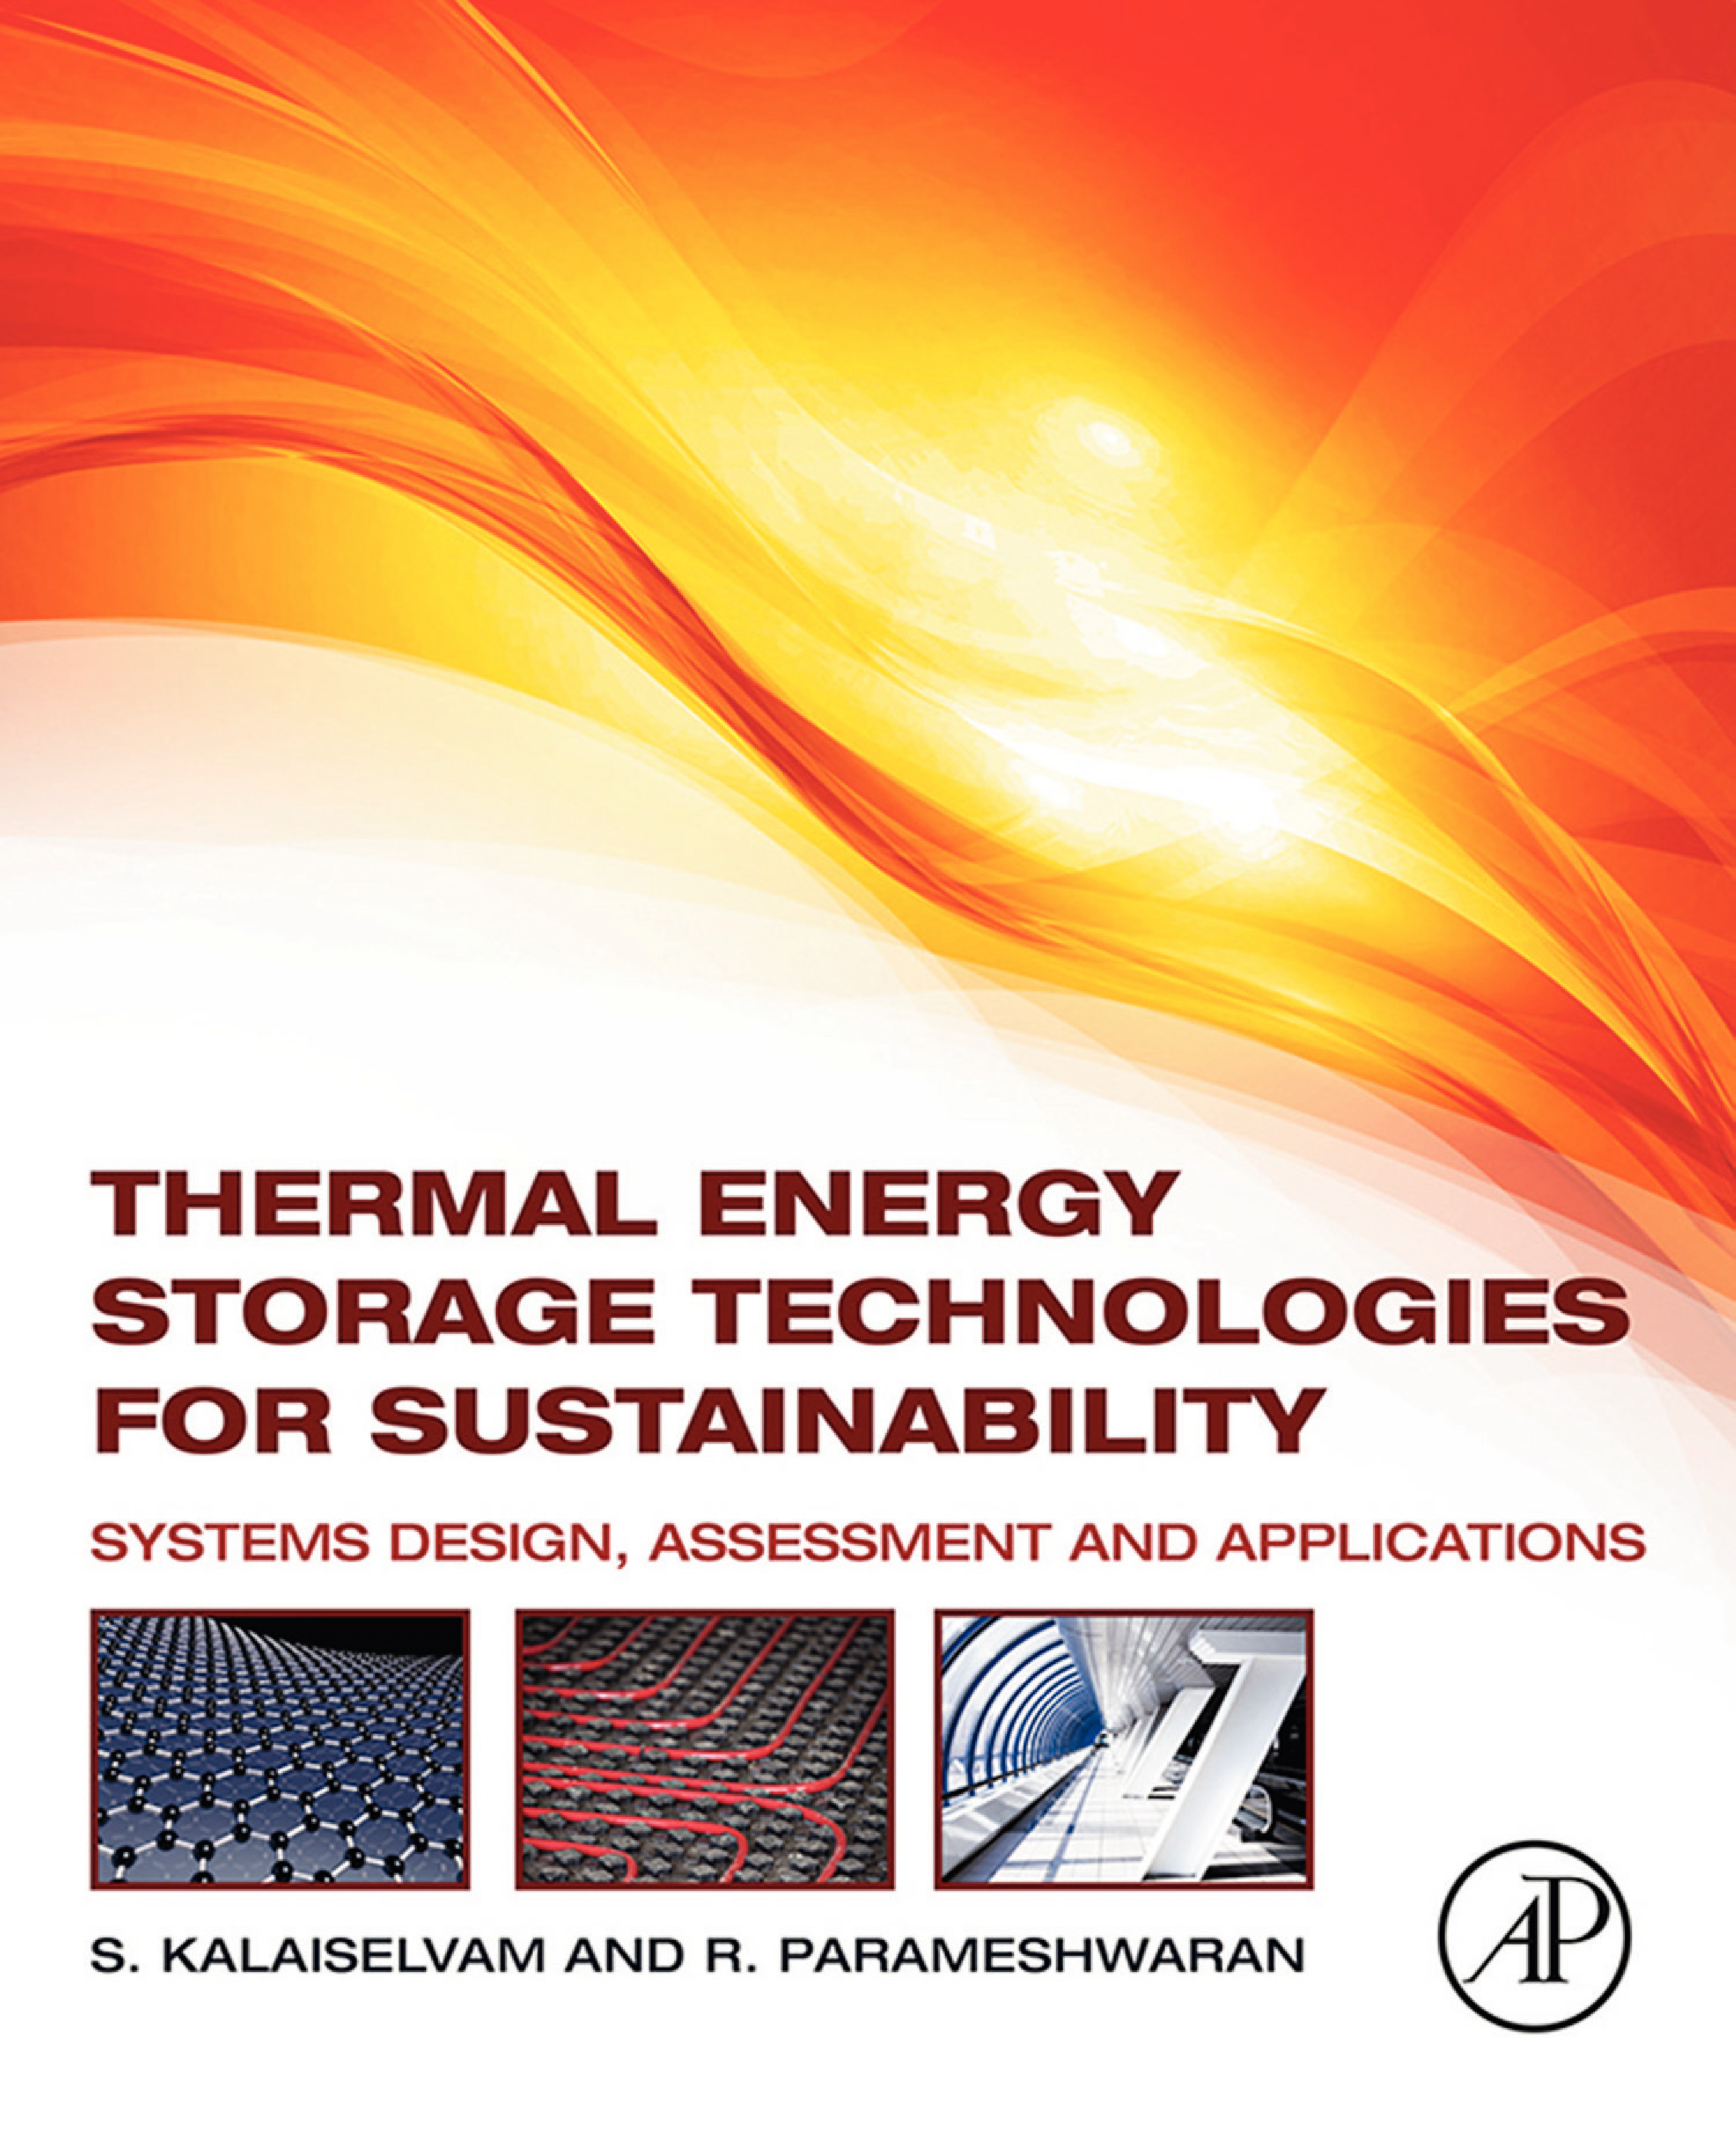 Thermal energy storage technologies for sustainability